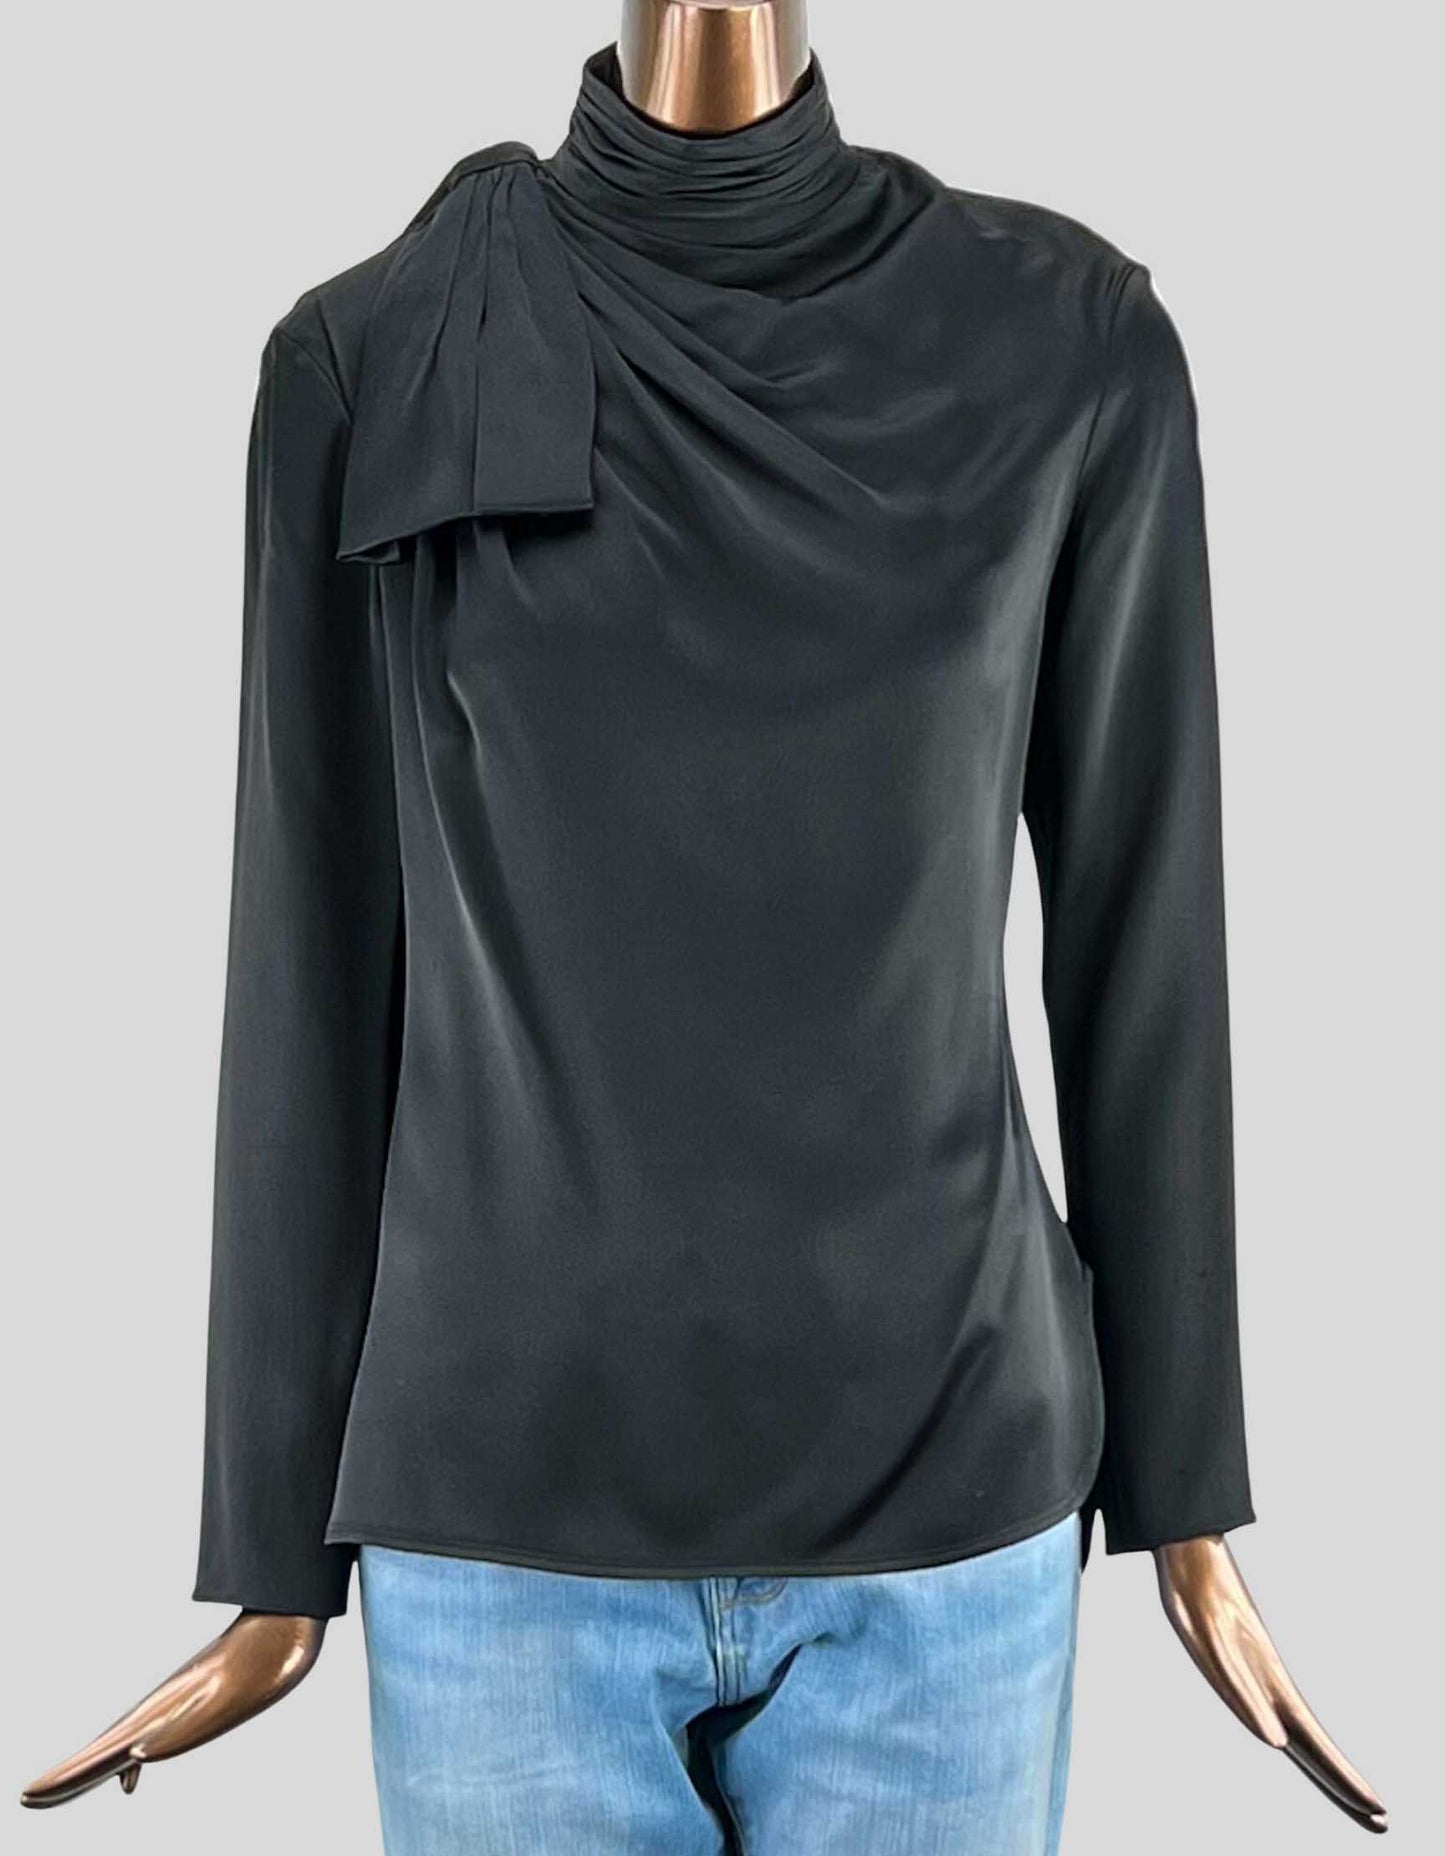 KHAITE mock neck long sleeve top with slouchy bow detail - 4 US